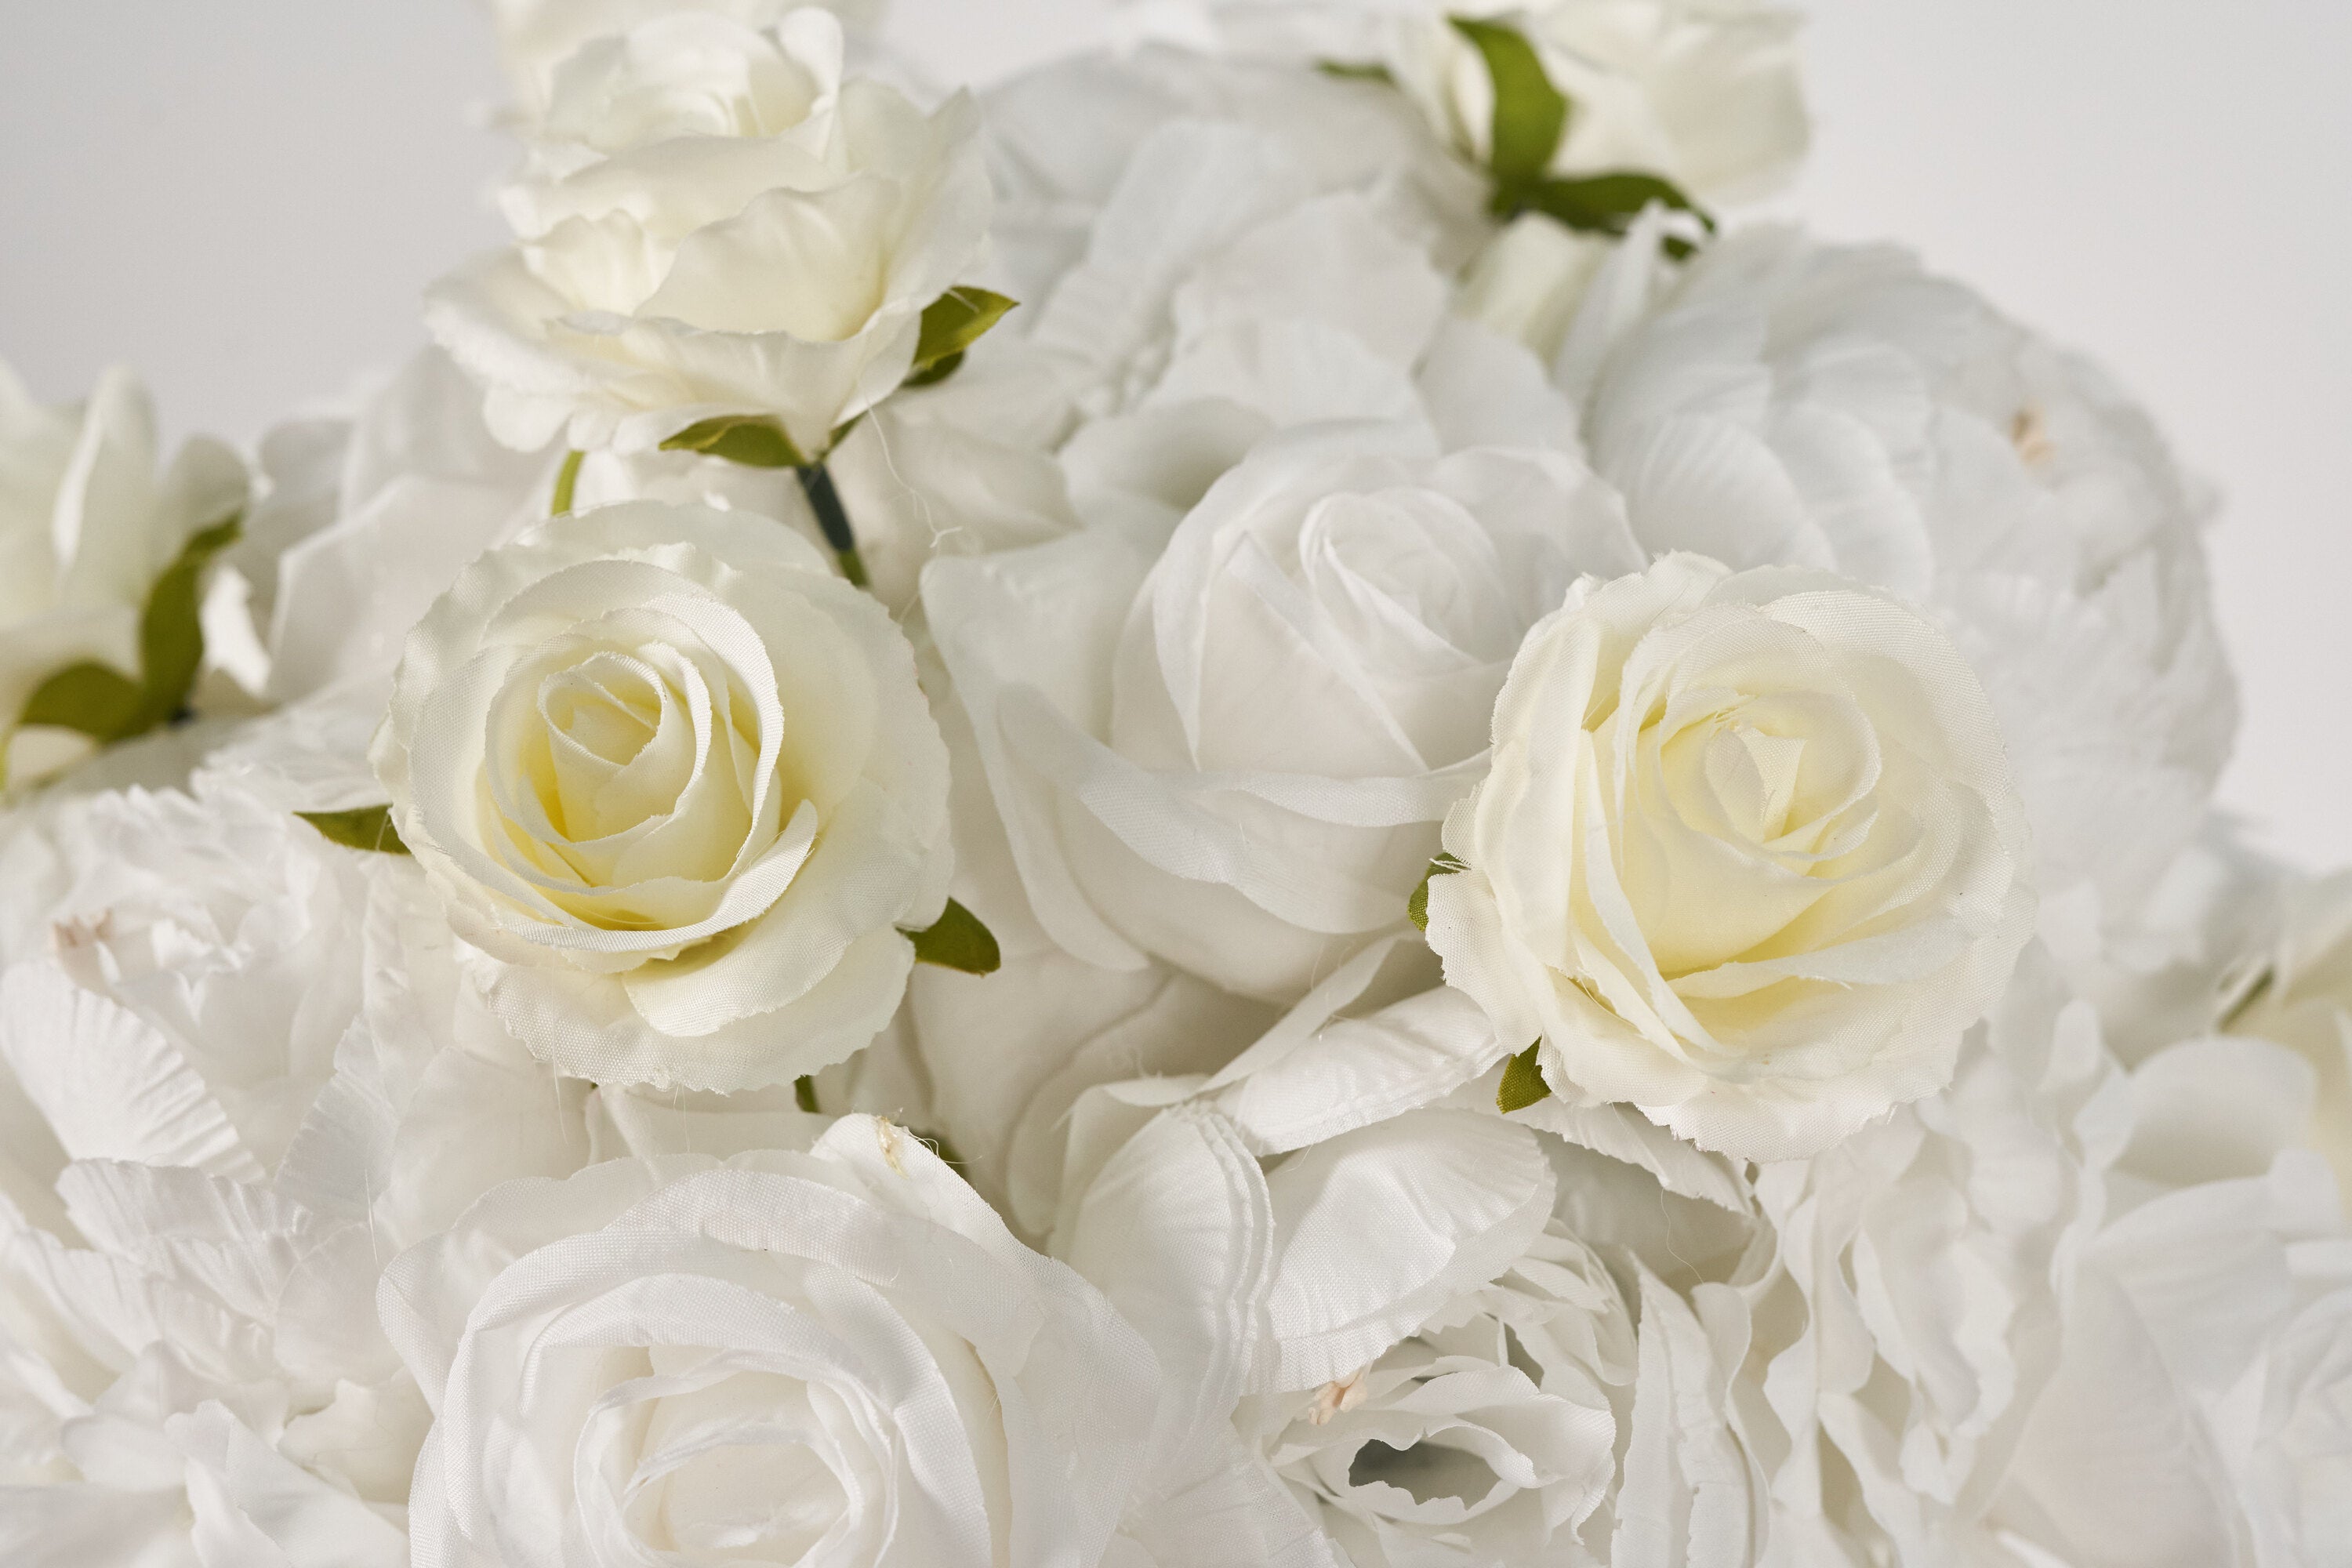 Flower Ball Pure White Roses Wedding Proposal Party Centerpieces Decor